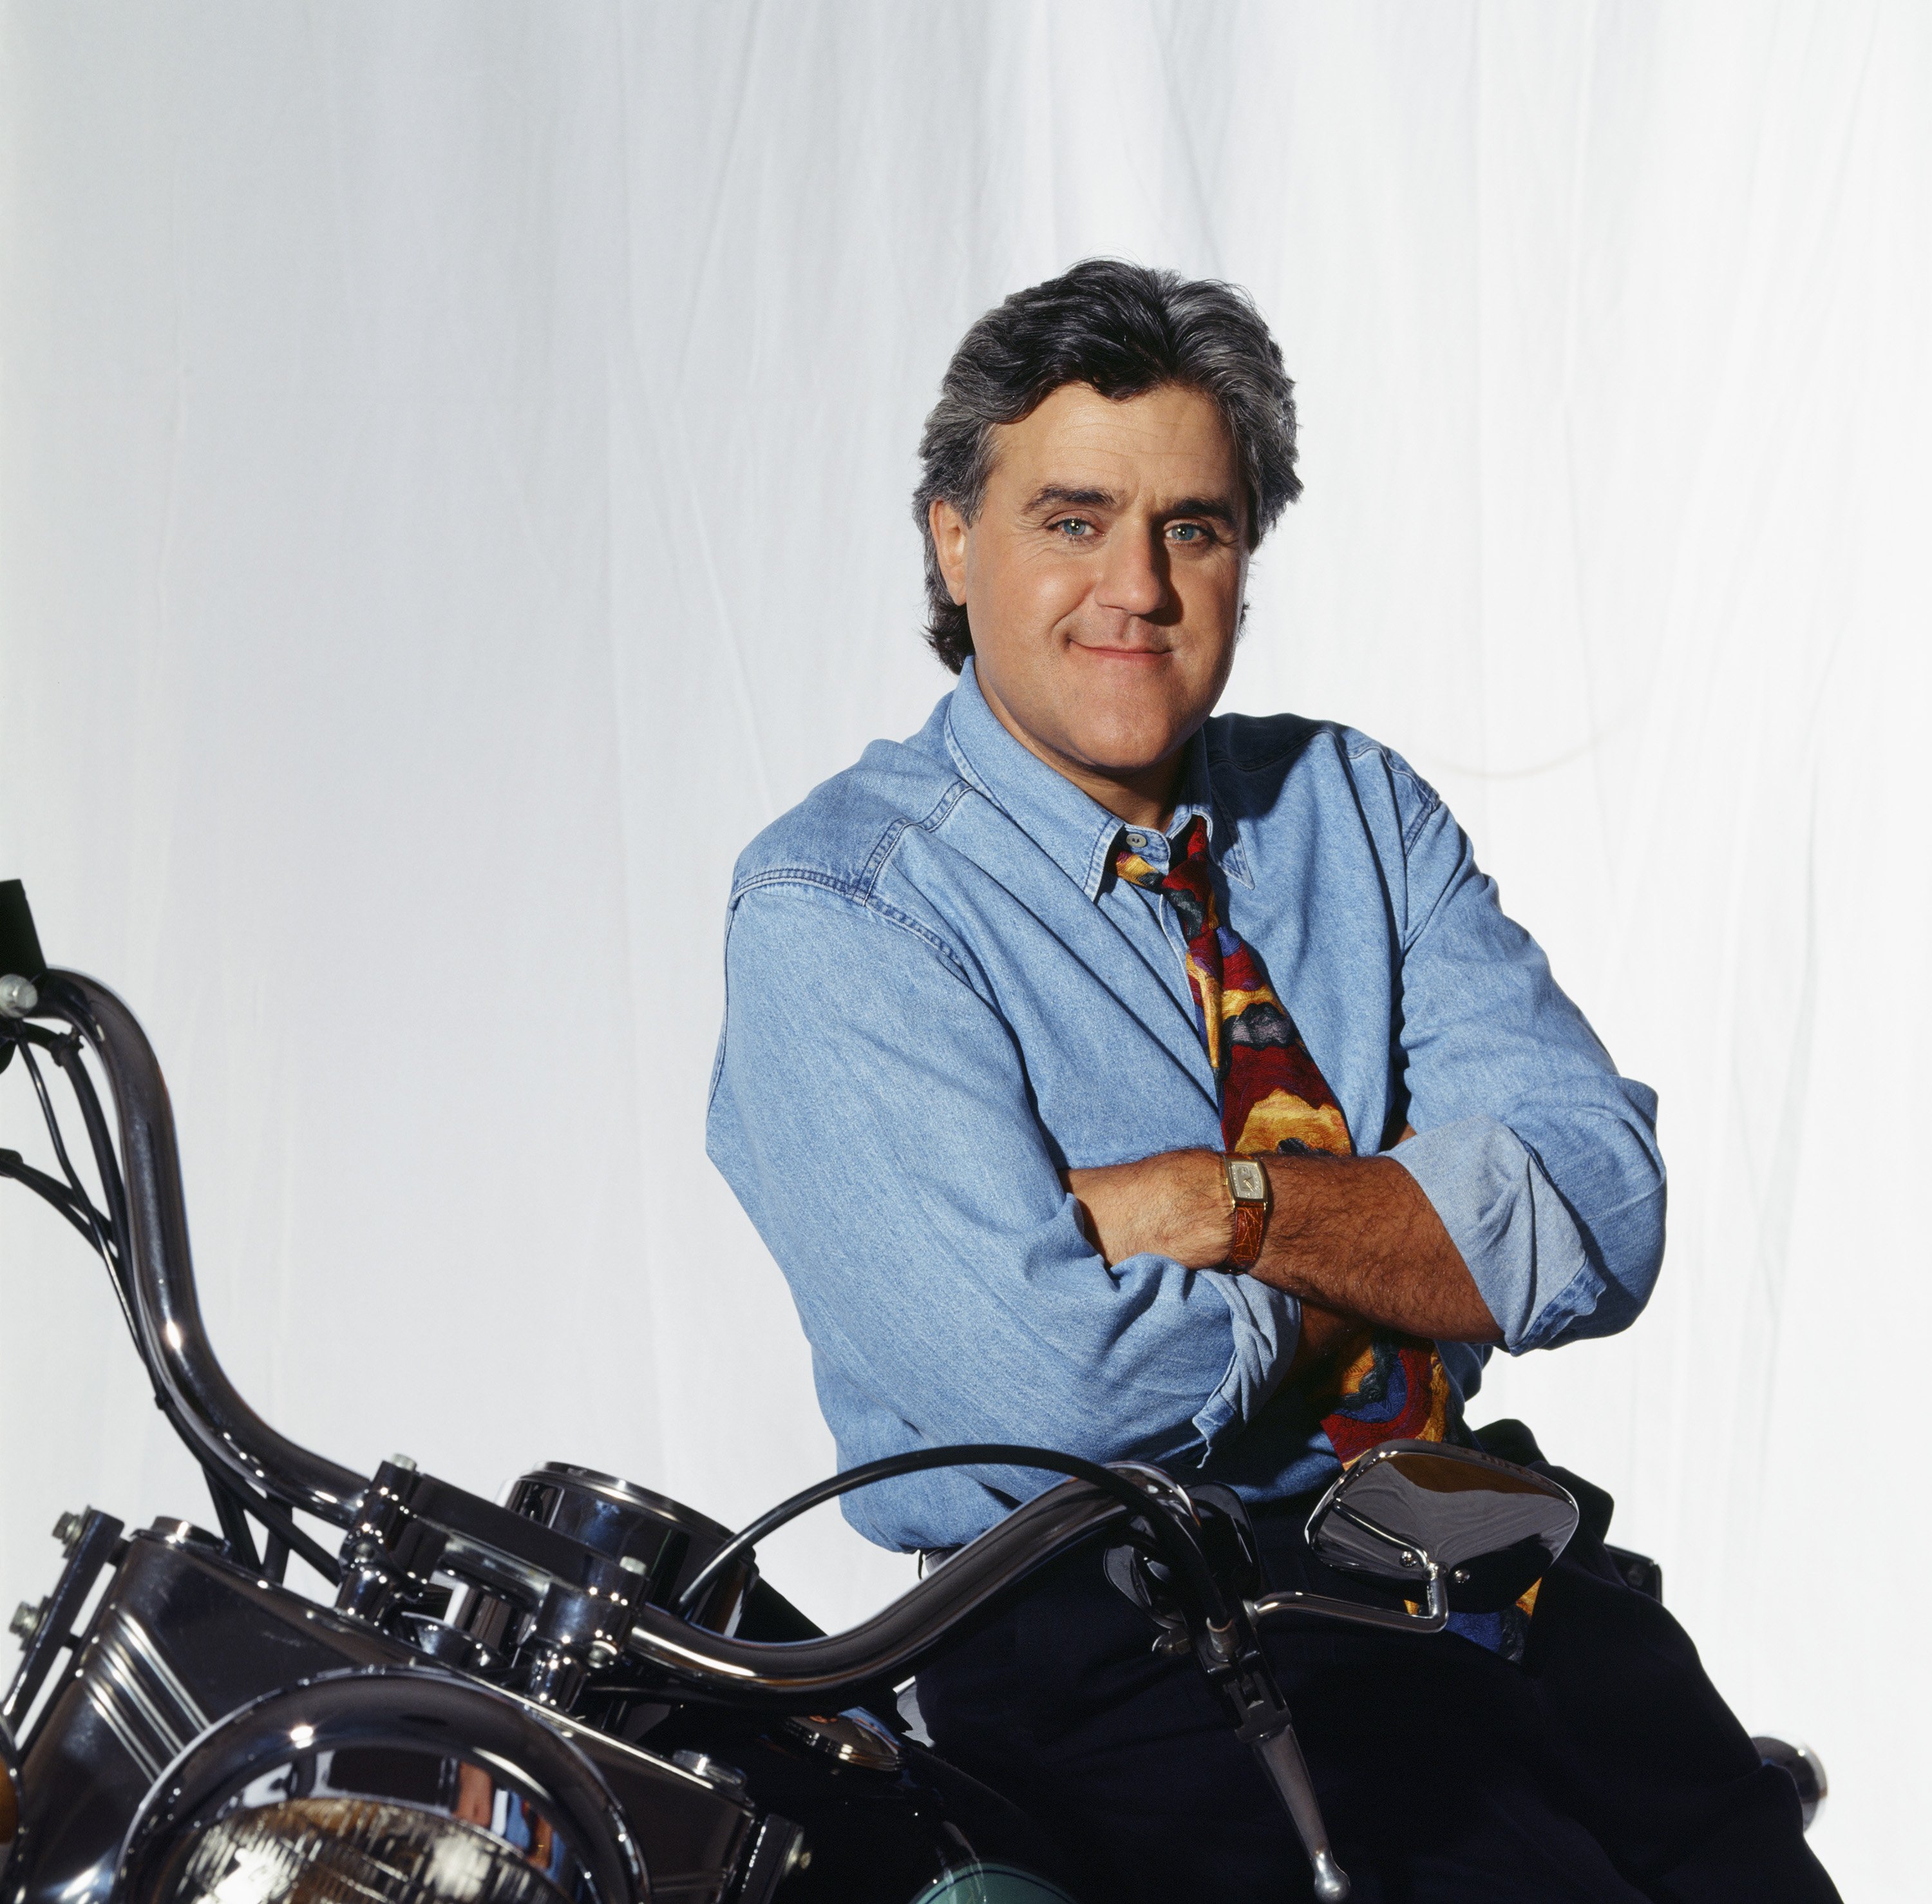 Jay Leno pictured during Season 5 of "The Tonight Show with Jay Leno." | Source: Getty Images